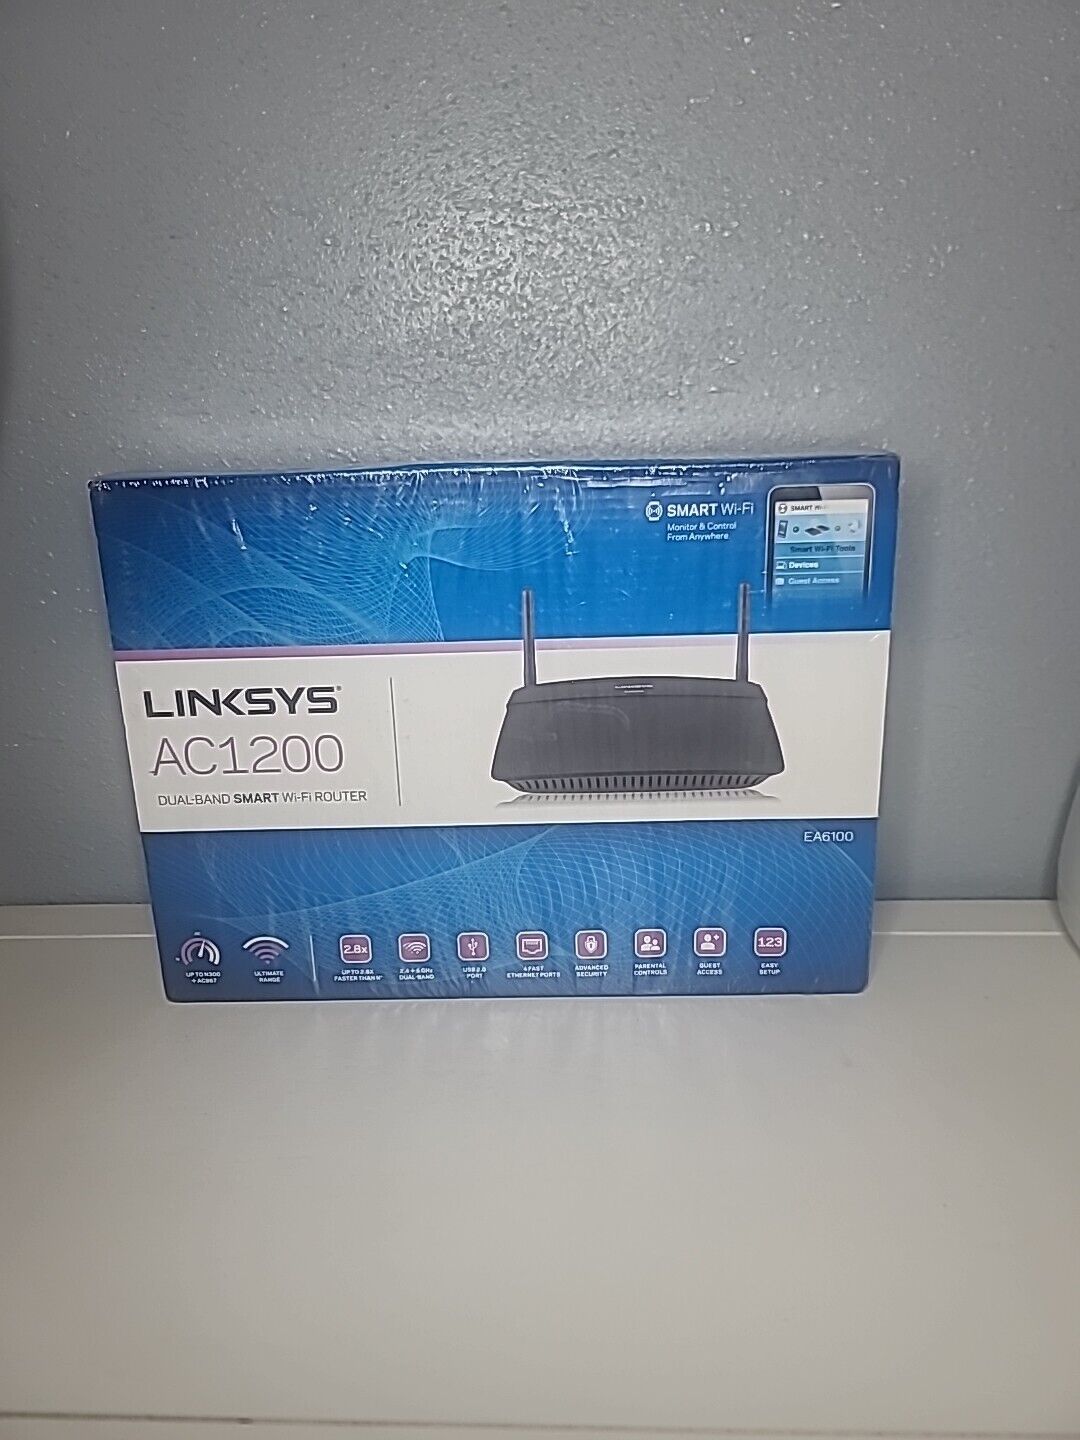 Cisco Linksys EA6100 Dual Band AC1200 Smart Wi-Fi Router w/ Power Cord